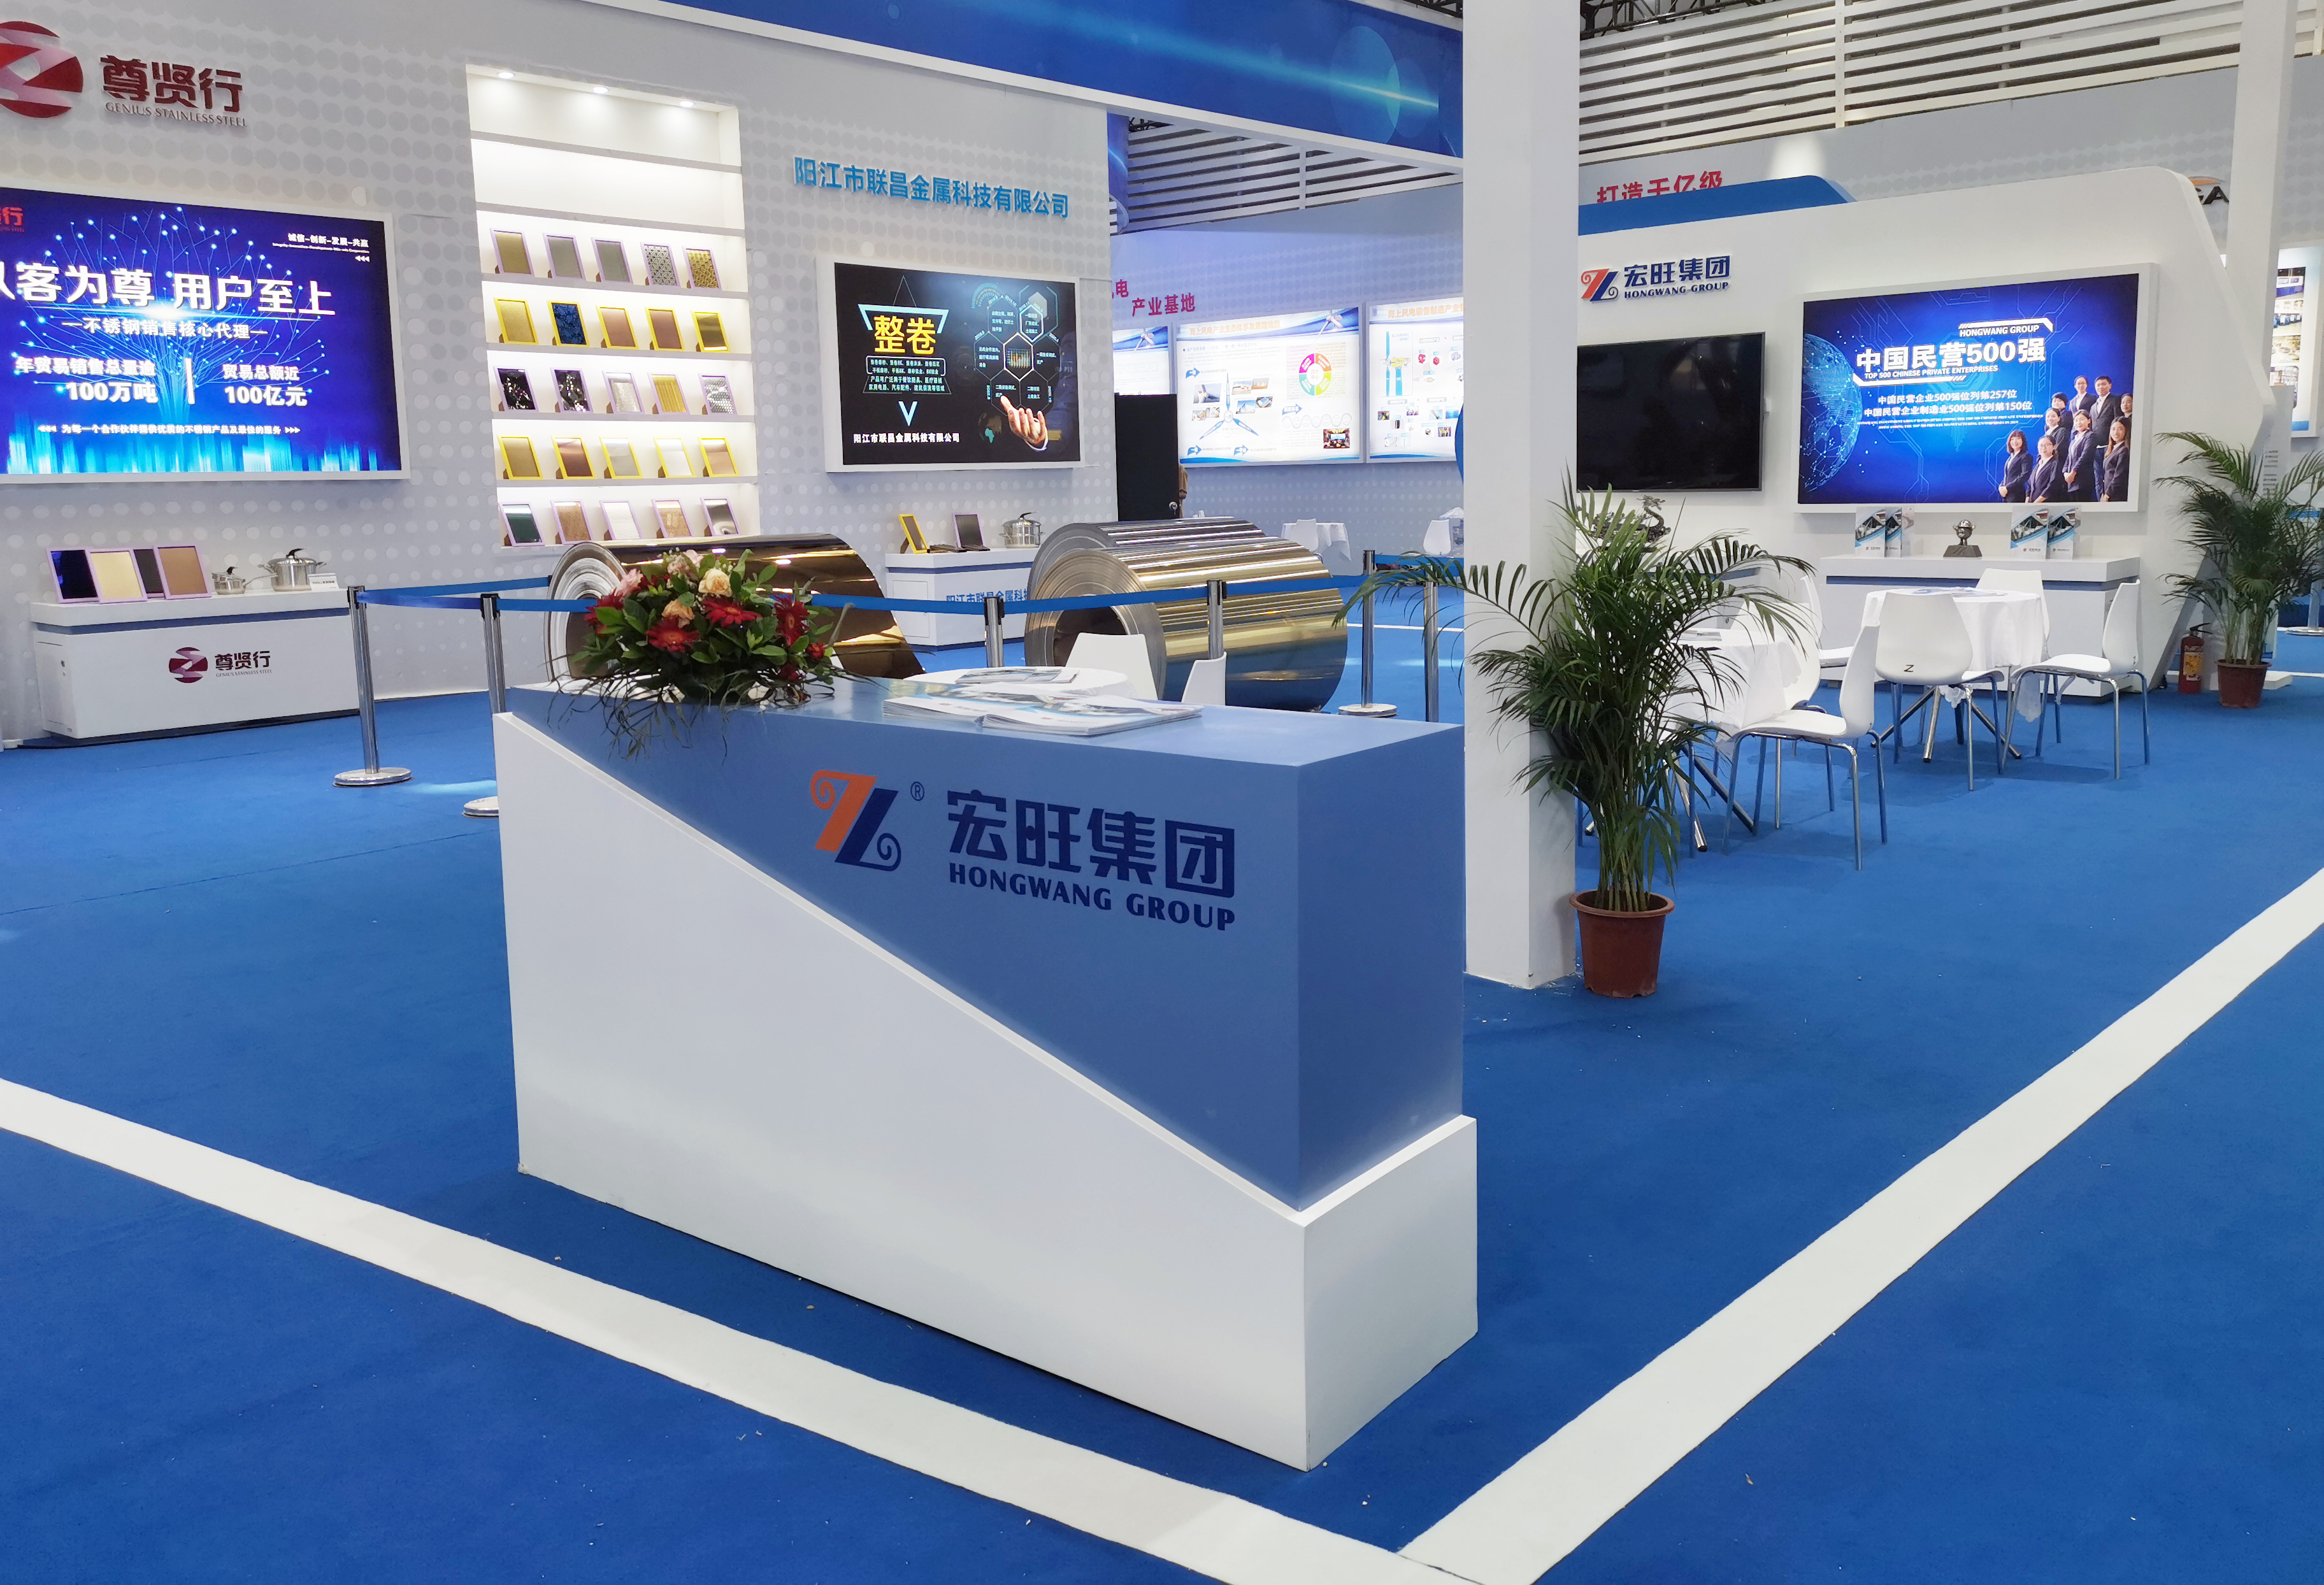 Hongwang participated the 5th Exposition for Investment and Trade of Advanced Equipment Manufacturing in West Bank of the Pearl River